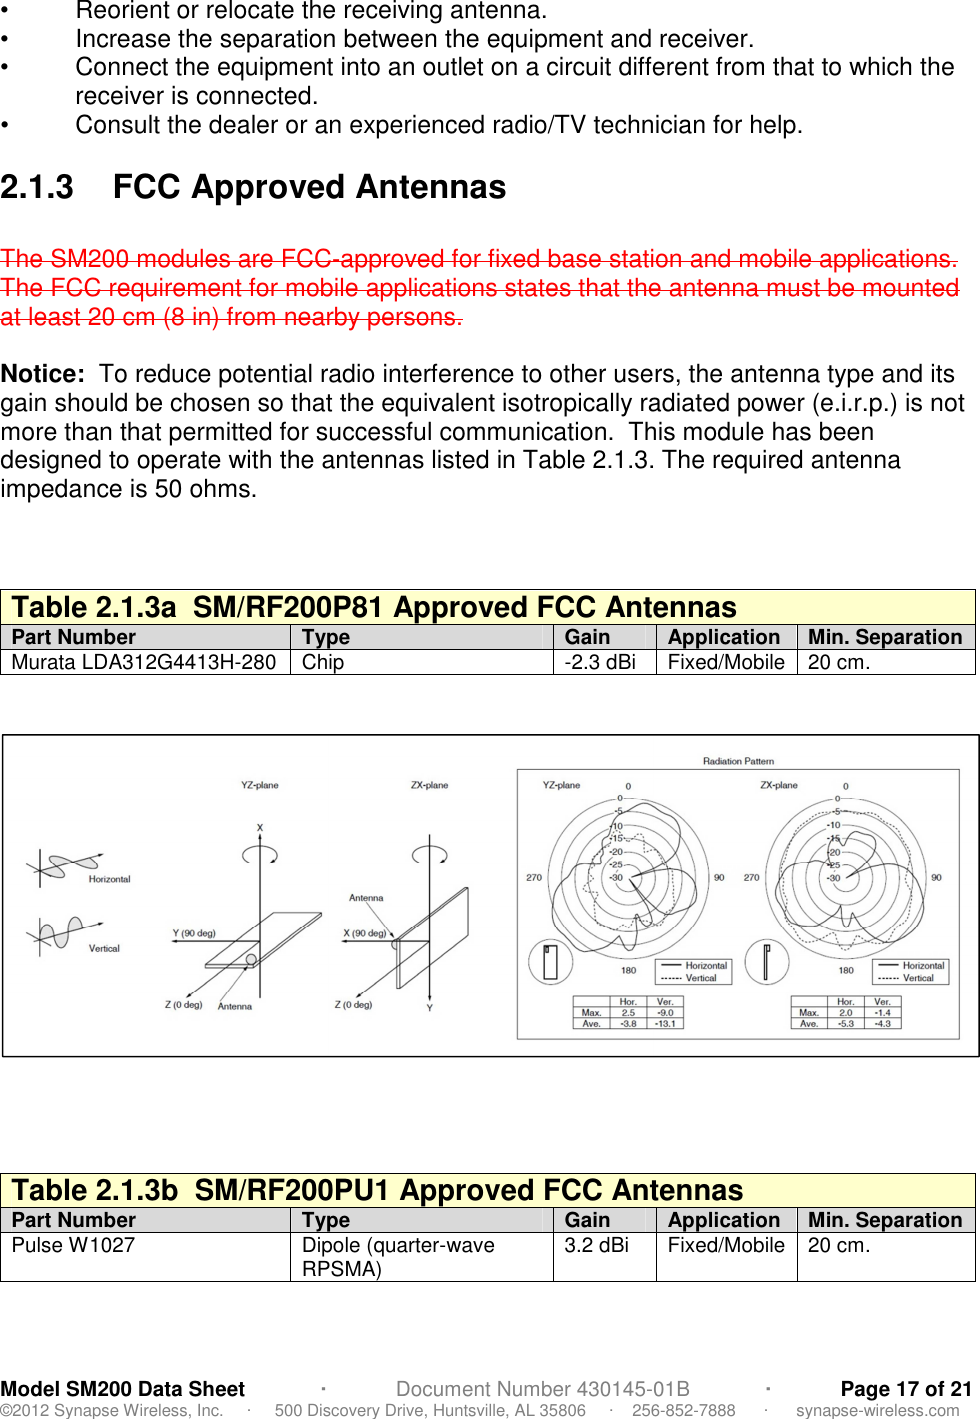 Model SM200 Data Sheet             ·            Document Number 430145-01B             ·            Page 17 of 21 ©2012 Synapse Wireless, Inc.     ·     500 Discovery Drive, Huntsville, AL 35806     ·    256-852-7888      ·      synapse-wireless.com •   Reorient or relocate the receiving antenna. •   Increase the separation between the equipment and receiver. •   Connect the equipment into an outlet on a circuit different from that to which the receiver is connected. •   Consult the dealer or an experienced radio/TV technician for help.  2.1.3  FCC Approved Antennas  The SM200 modules are FCC-approved for fixed base station and mobile applications.  The FCC requirement for mobile applications states that the antenna must be mounted at least 20 cm (8 in) from nearby persons.    Notice:  To reduce potential radio interference to other users, the antenna type and its gain should be chosen so that the equivalent isotropically radiated power (e.i.r.p.) is not more than that permitted for successful communication.  This module has been designed to operate with the antennas listed in Table 2.1.3. The required antenna impedance is 50 ohms.    Table 2.1.3a  SM/RF200P81 Approved FCC Antennas Part Number Type  Gain Application Min. Separation Murata LDA312G4413H-280  Chip  -2.3 dBi  Fixed/Mobile 20 cm.        Table 2.1.3b  SM/RF200PU1 Approved FCC Antennas Part Number Type  Gain Application Min. Separation Pulse W1027  Dipole (quarter-wave RPSMA)  3.2 dBi  Fixed/Mobile 20 cm.   